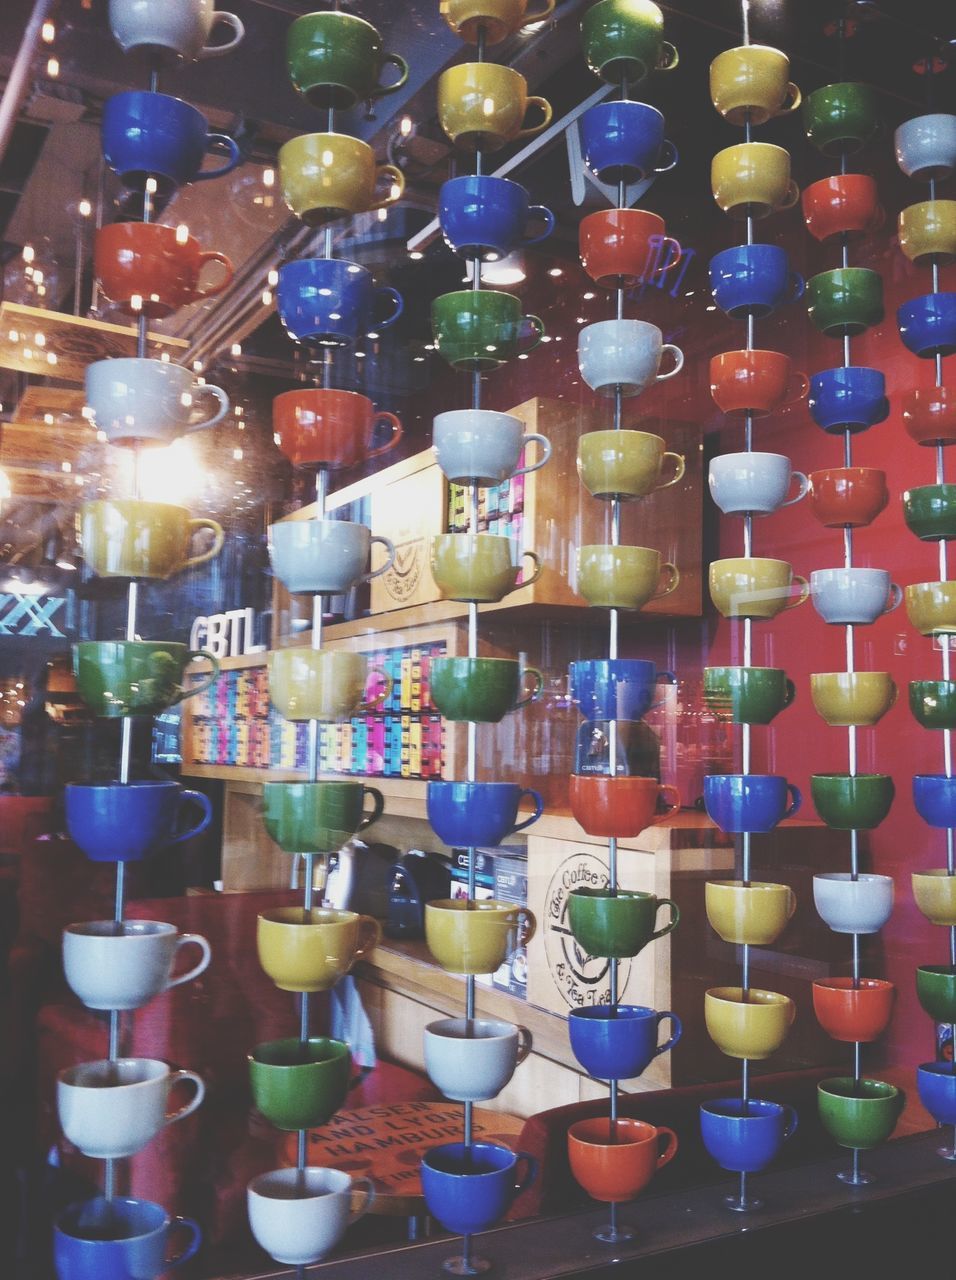 indoors, large group of objects, multi colored, abundance, variation, still life, arrangement, illuminated, in a row, choice, lighting equipment, decoration, order, table, food and drink, close-up, colorful, no people, repetition, collection